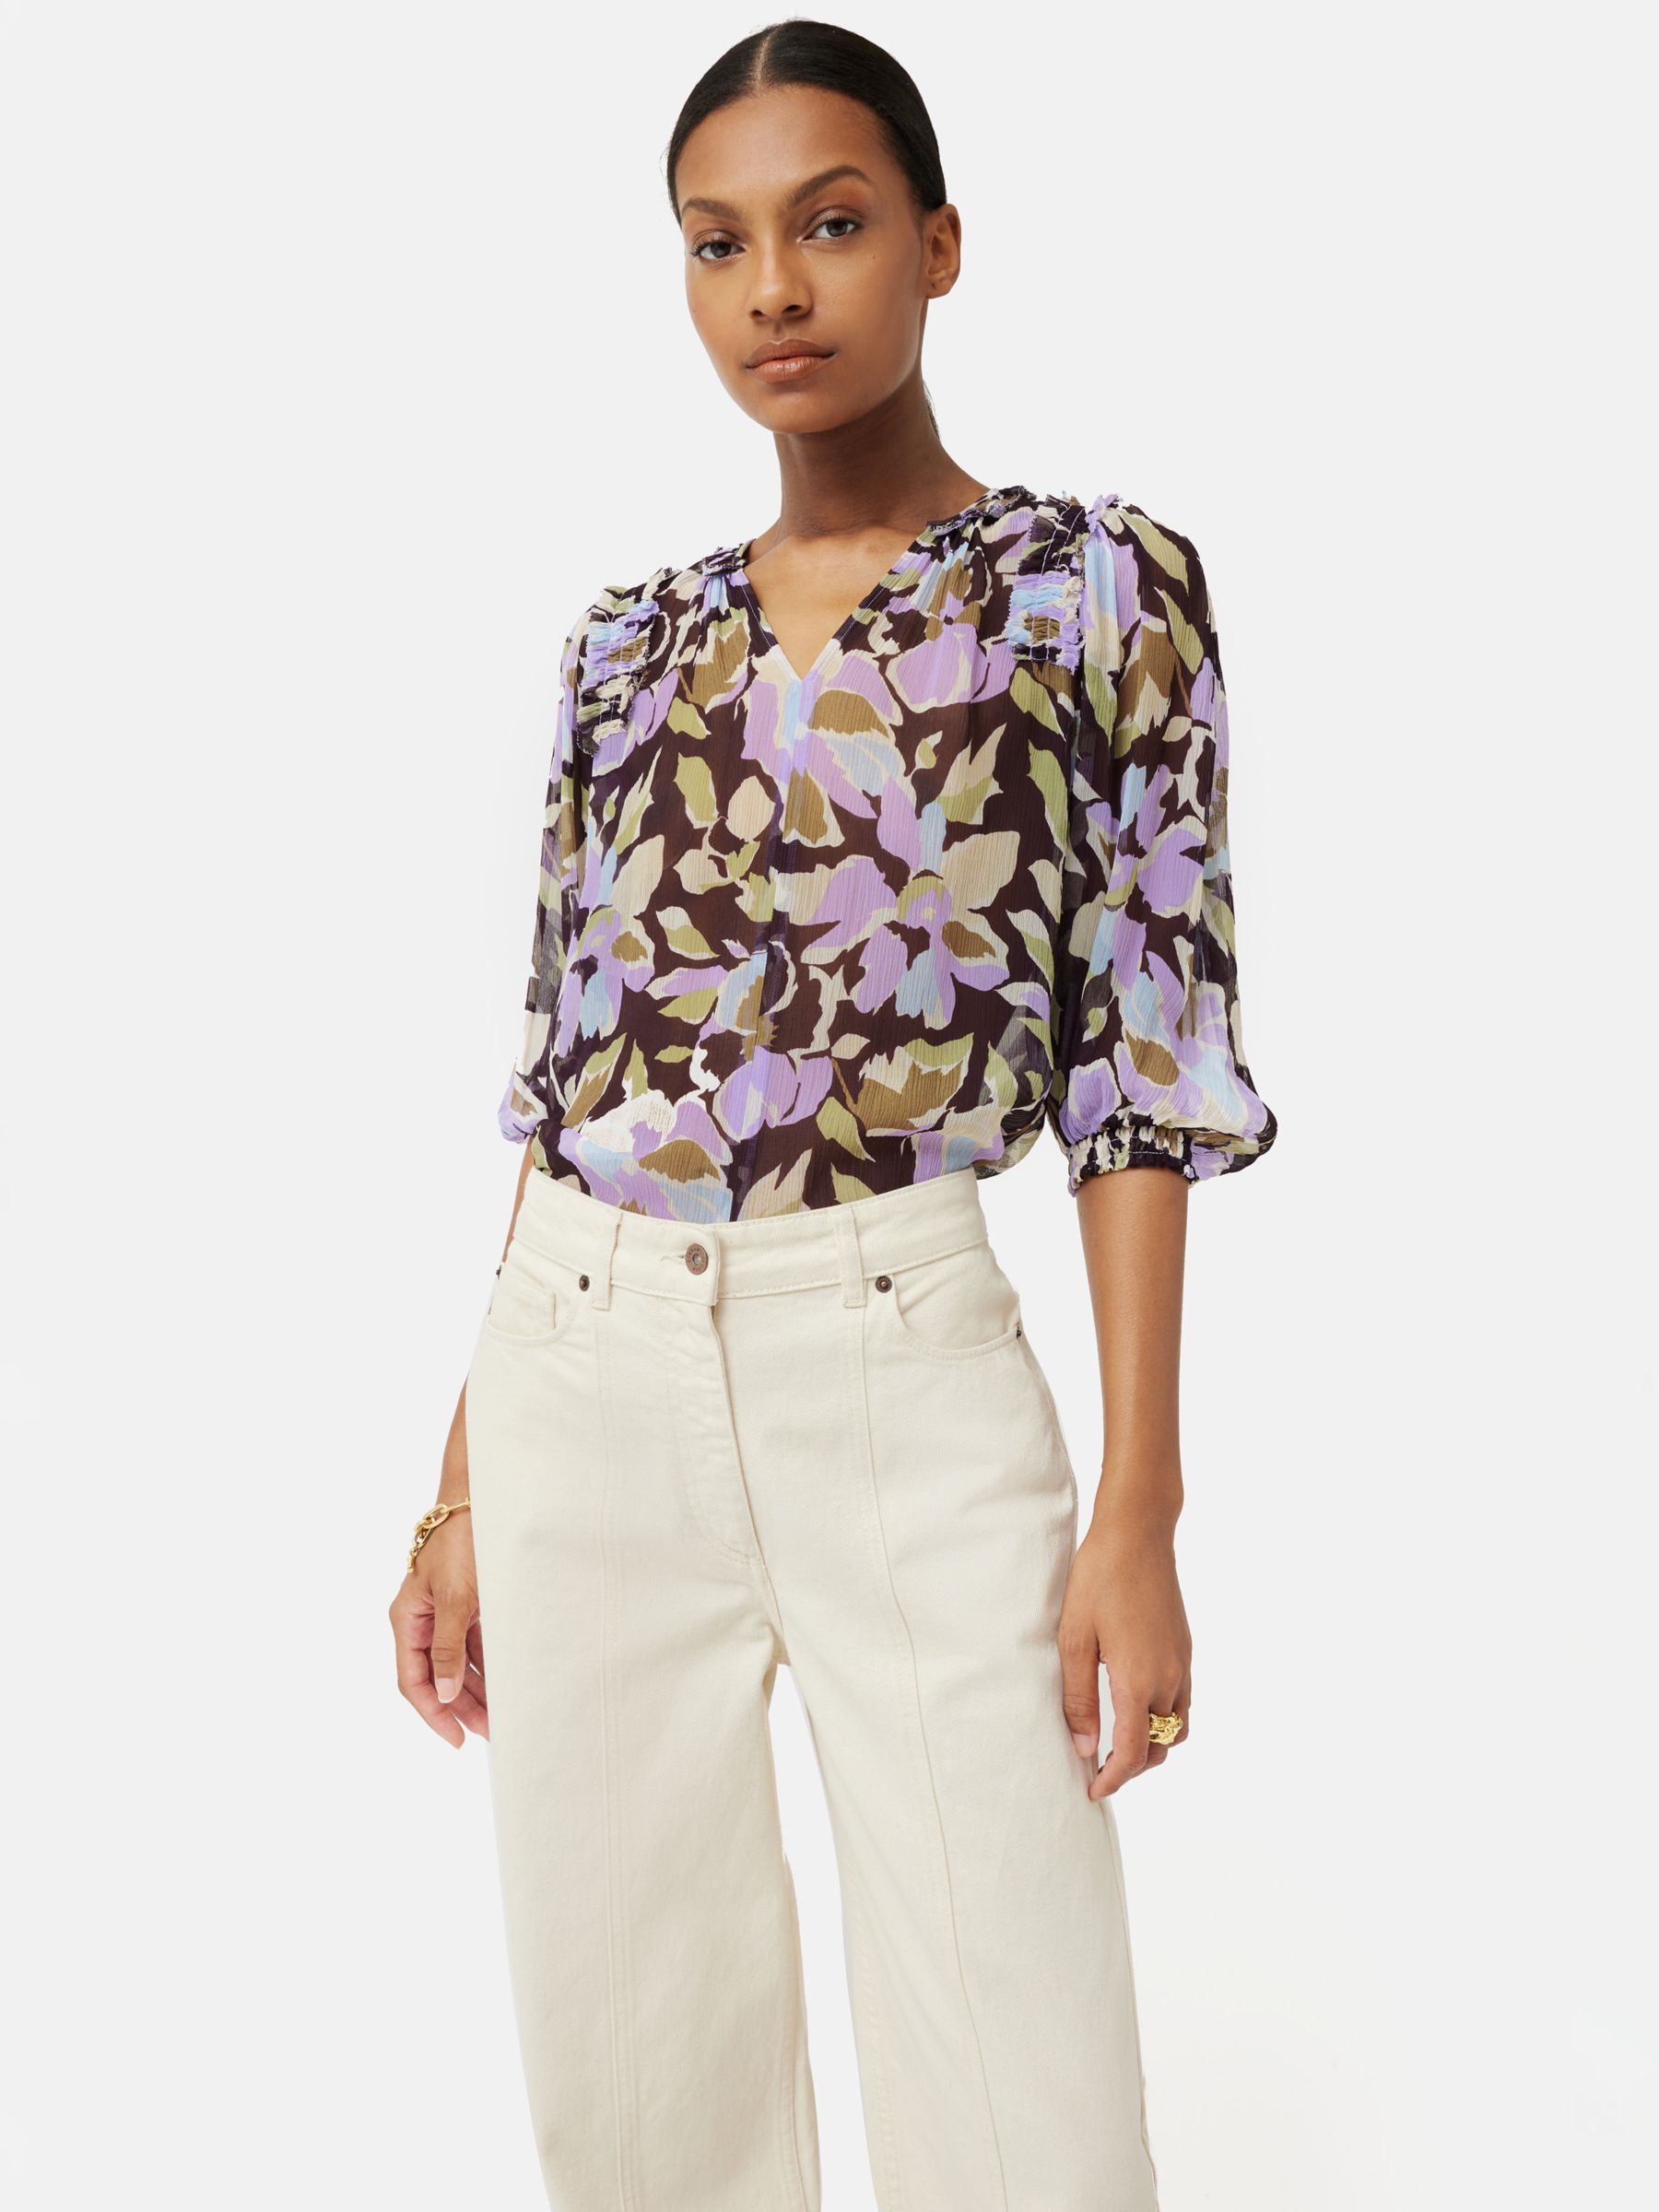 Jigsaw Graphic Pansy Crinkle Top, Lilac/Multi at John Lewis & Partners